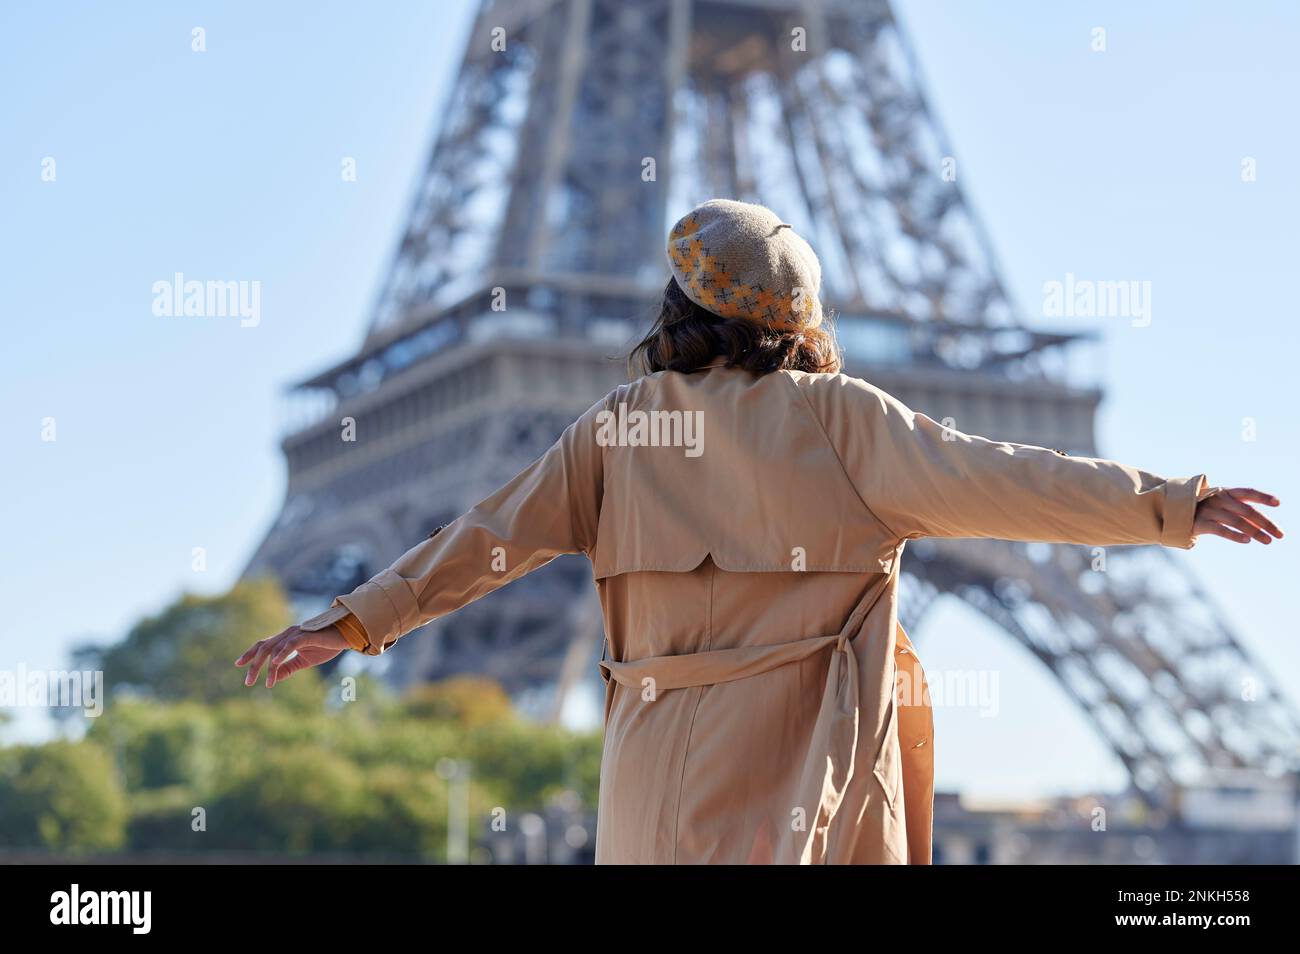 Woman with arms outstretched in front of Eiffel tower, Paris, France Stock Photo